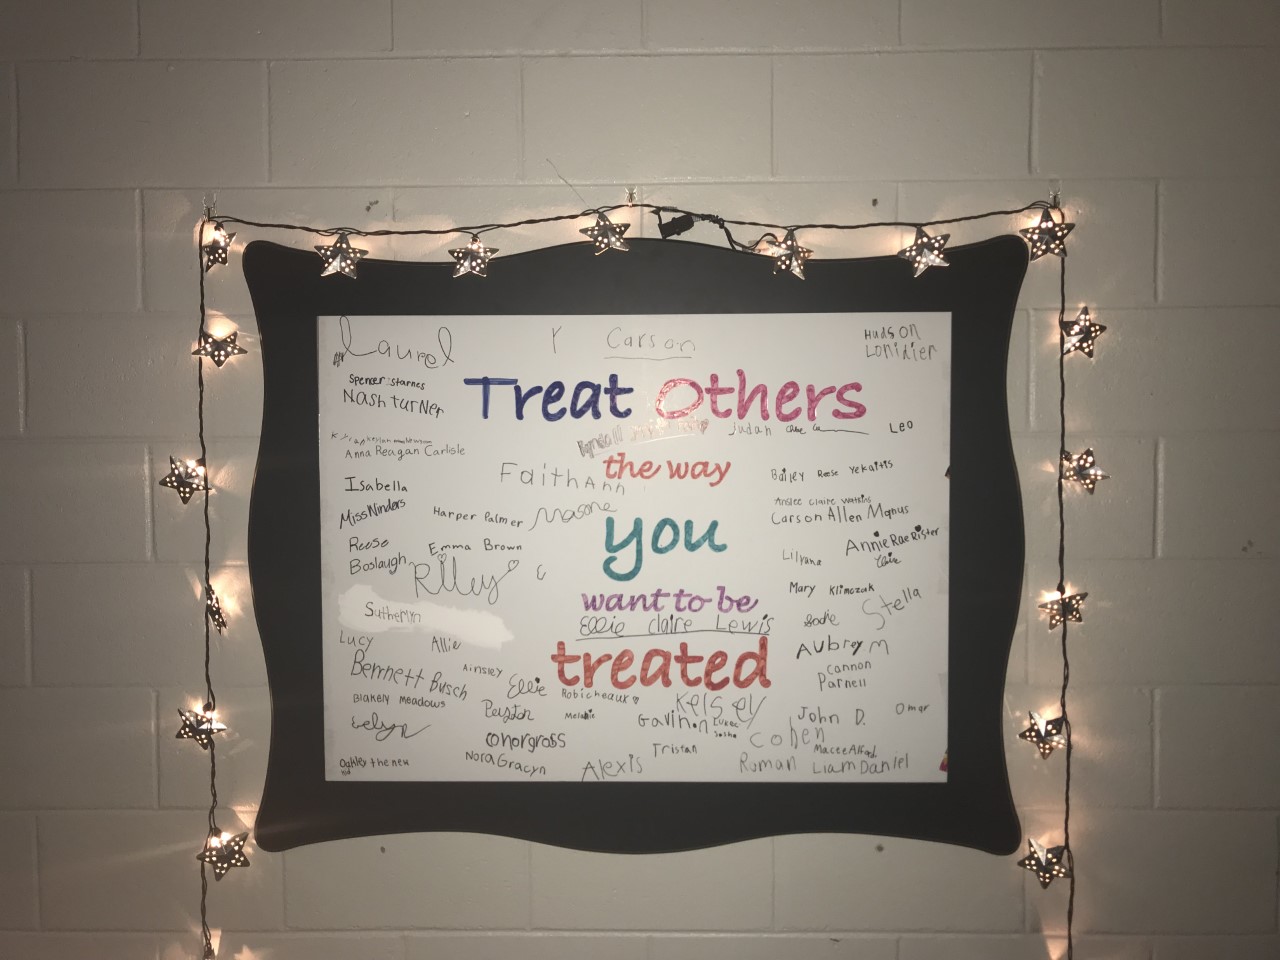 Treat others the way you want to be treated